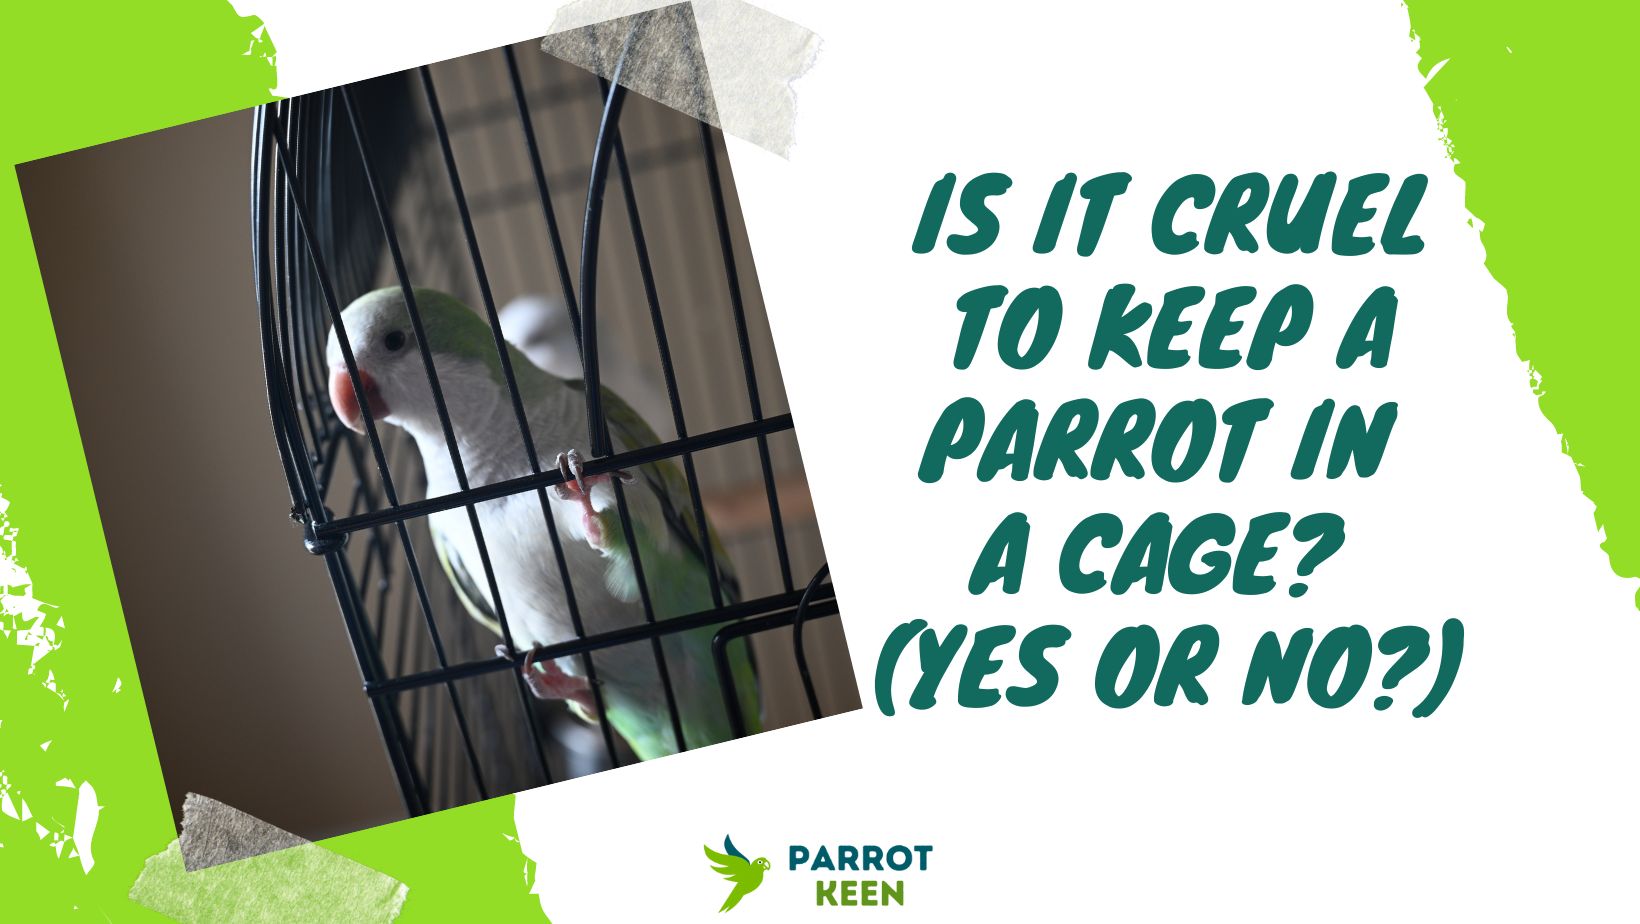 Is It Cruel to Keep a Parrot in a Cage ( Yes or No)